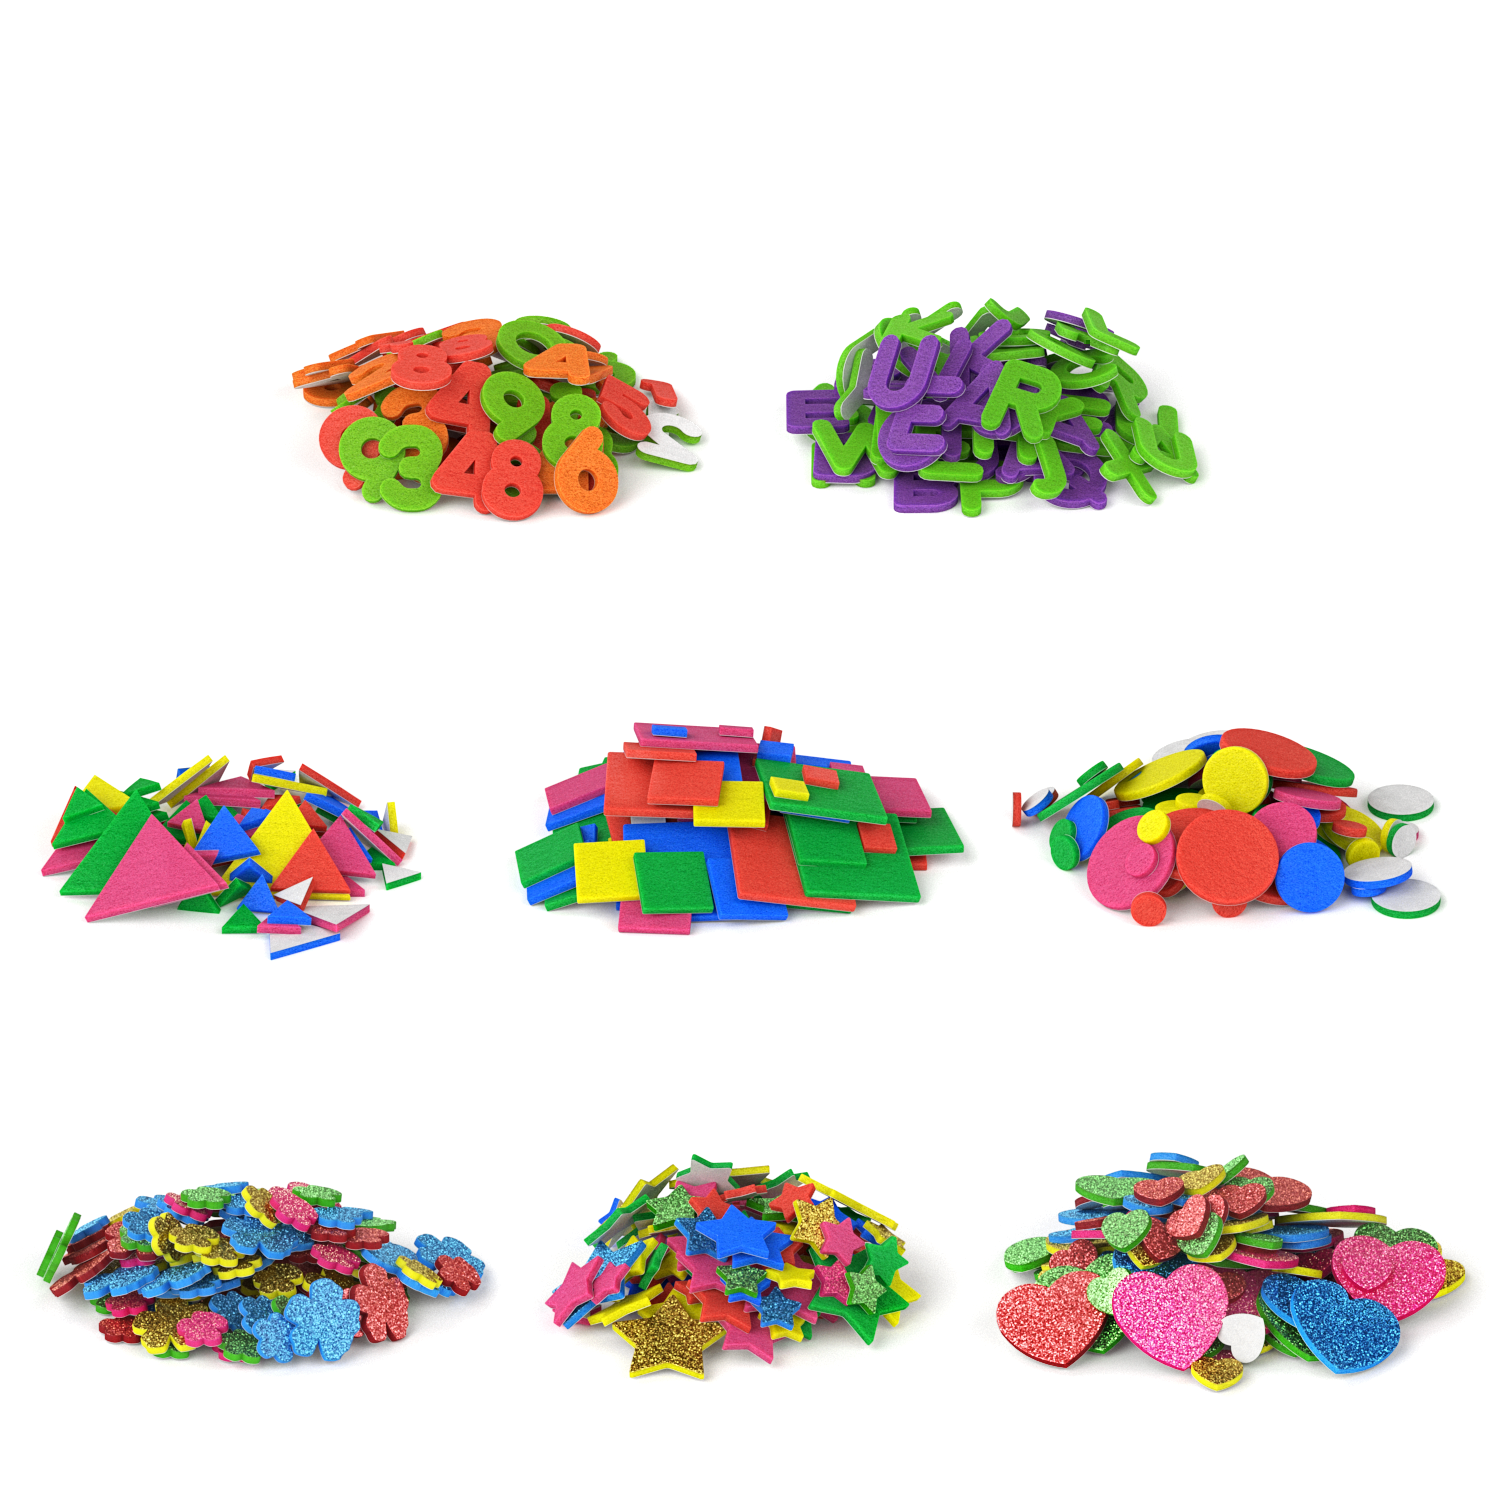 Colorations Self-Adhesive Foam Shapes - Set of 1,000